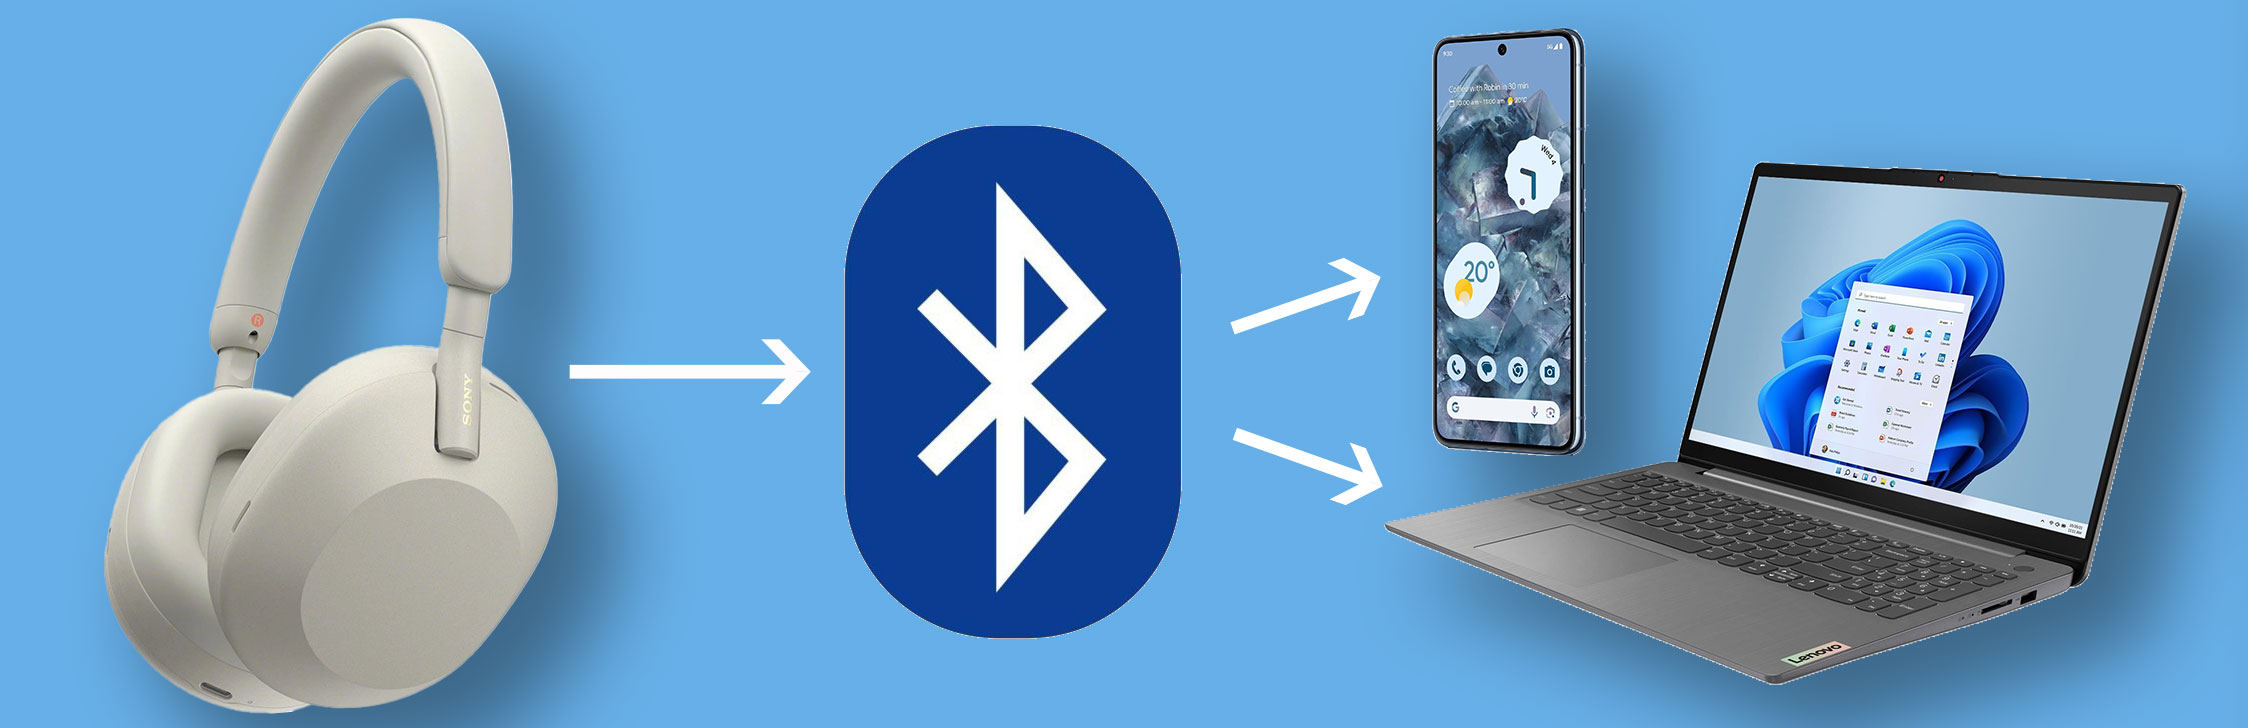 What is Bluetooth multipoint pairing, and why do you need it? - JB